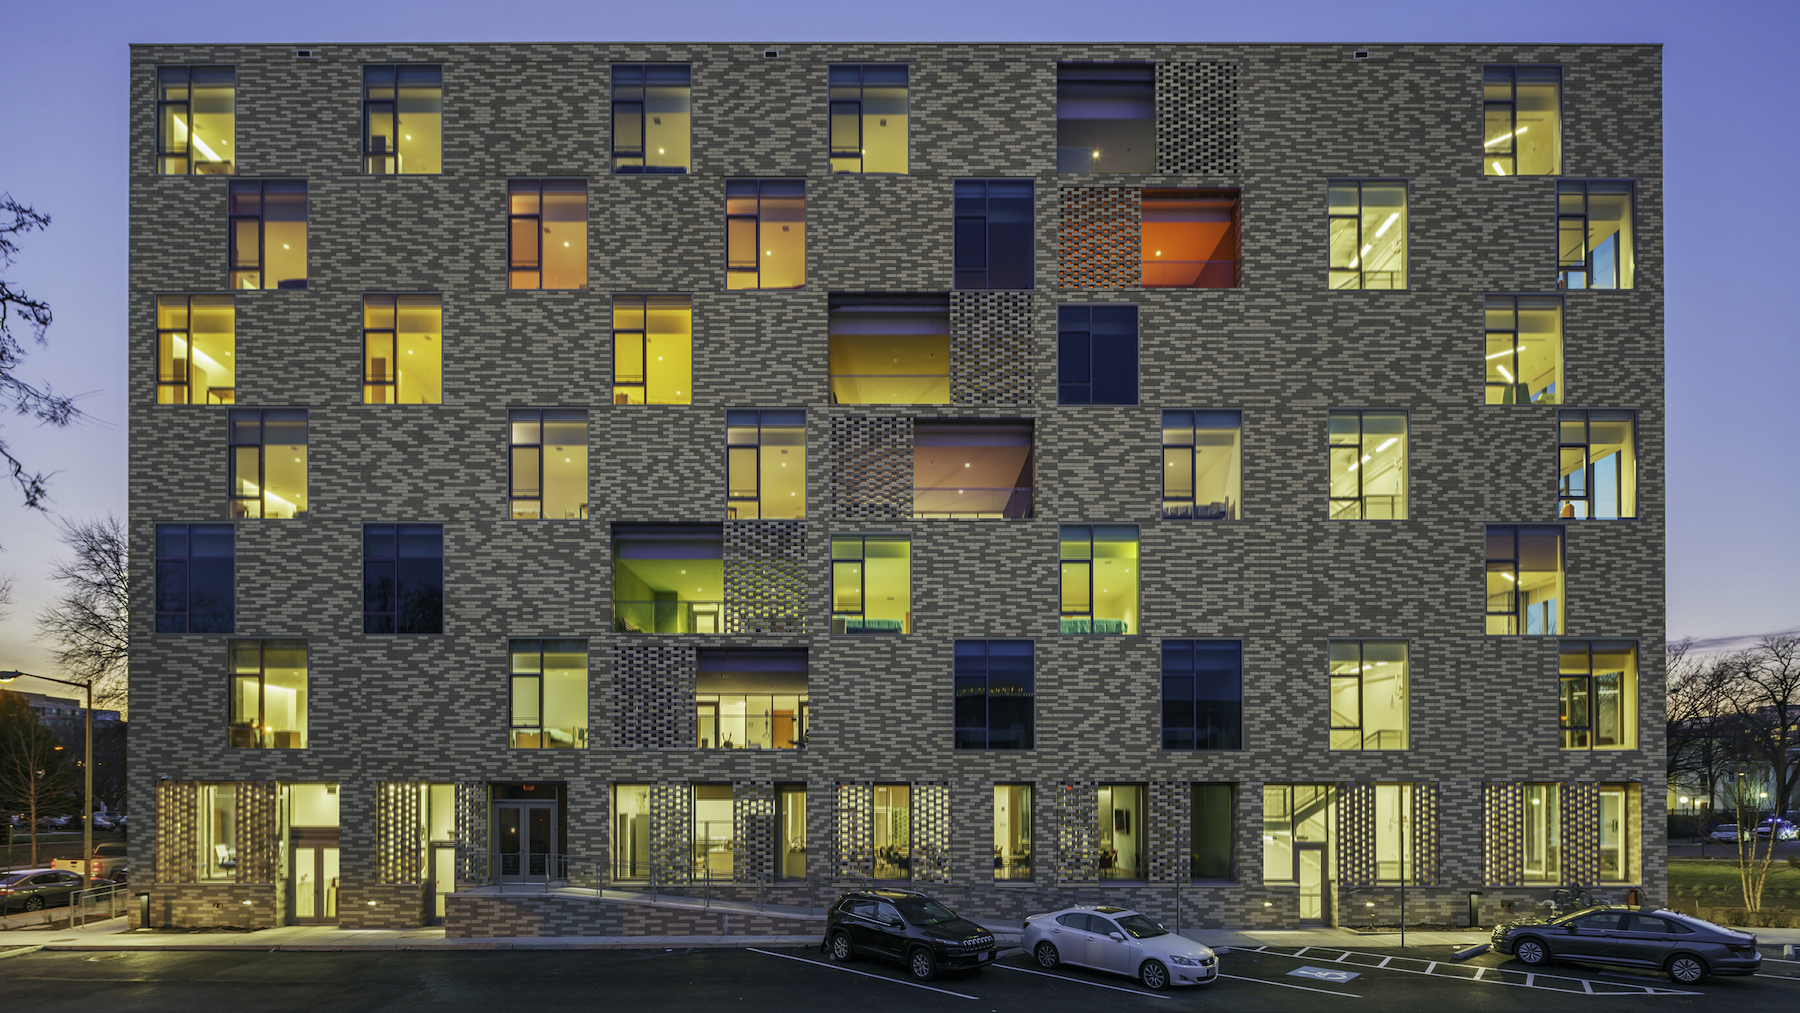 The Aya. An affortdable housing project in the District of Columbia. All images are courtesy of Anice Hoachlander